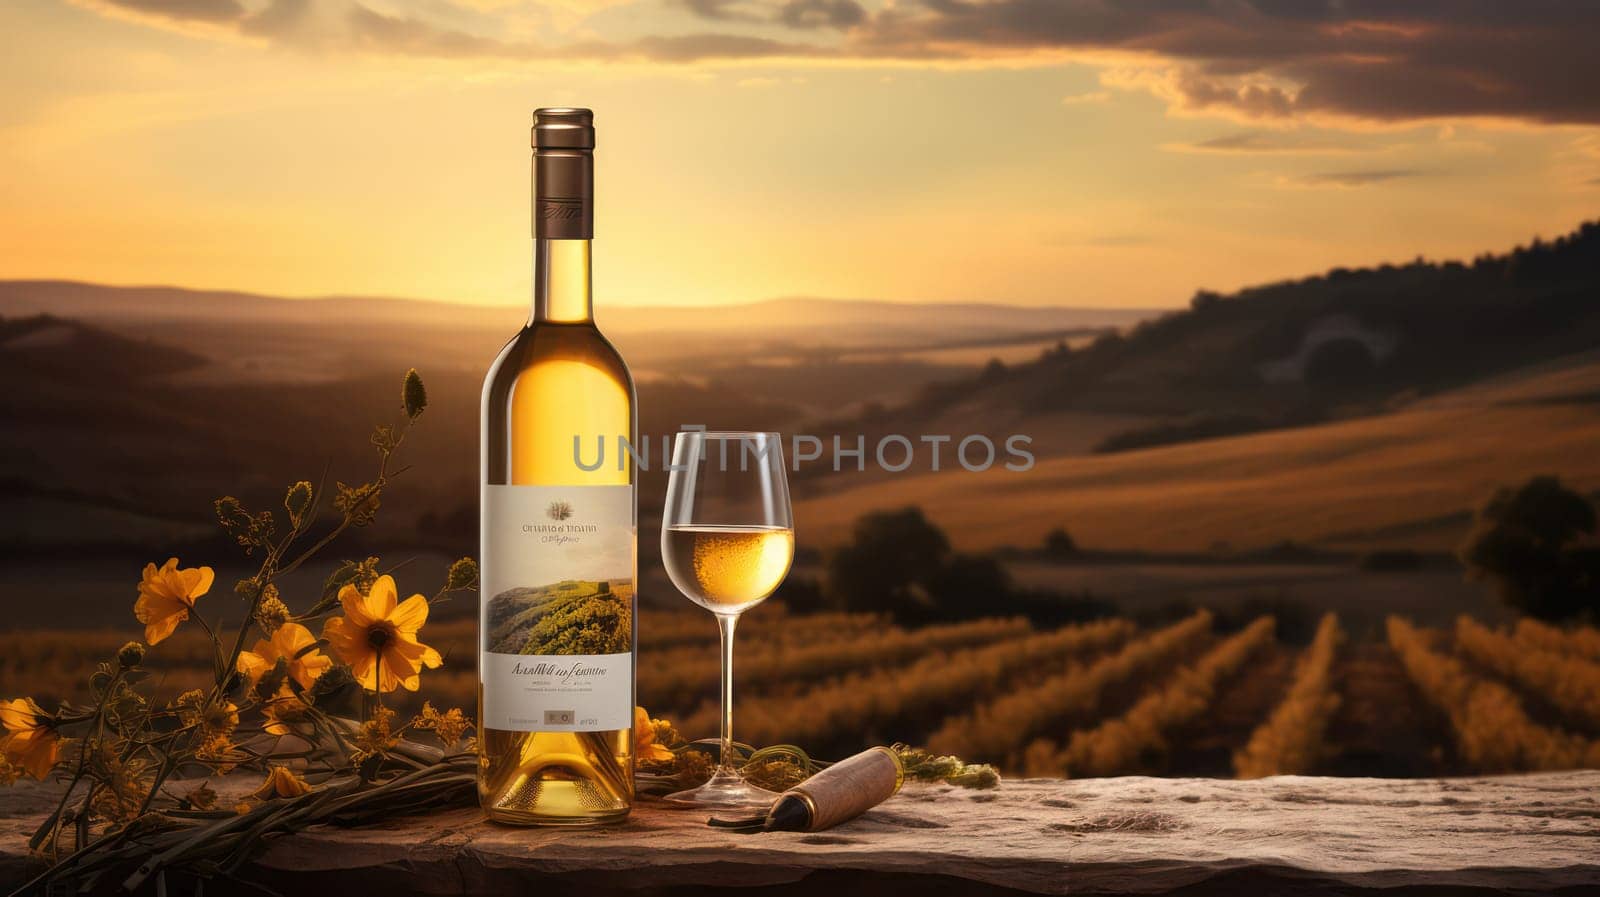 Romantic Wine Tasting in the Italian Countryside: A Still Life of Wine Bottles, Glasses, and Cheese, Surrounded by Lush Autumn Vineyards, with a Breathtaking Sunset over the Valley and Hills.